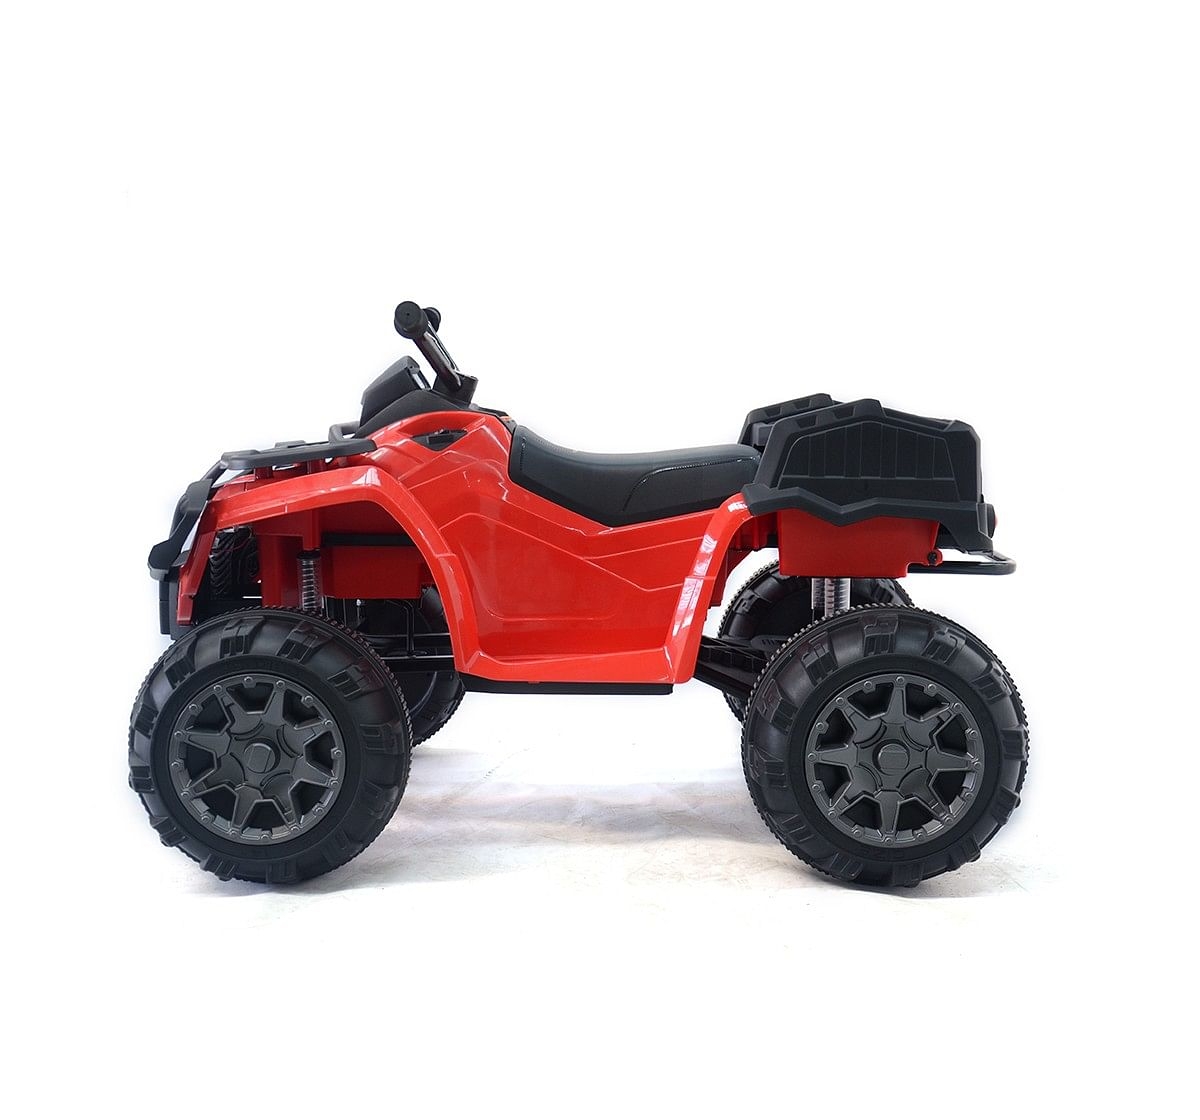 Bettyma Atv Rc Buggy 2.5Ghz - Red Battery Operated Rideons for Kids age 3Y+ (Red)